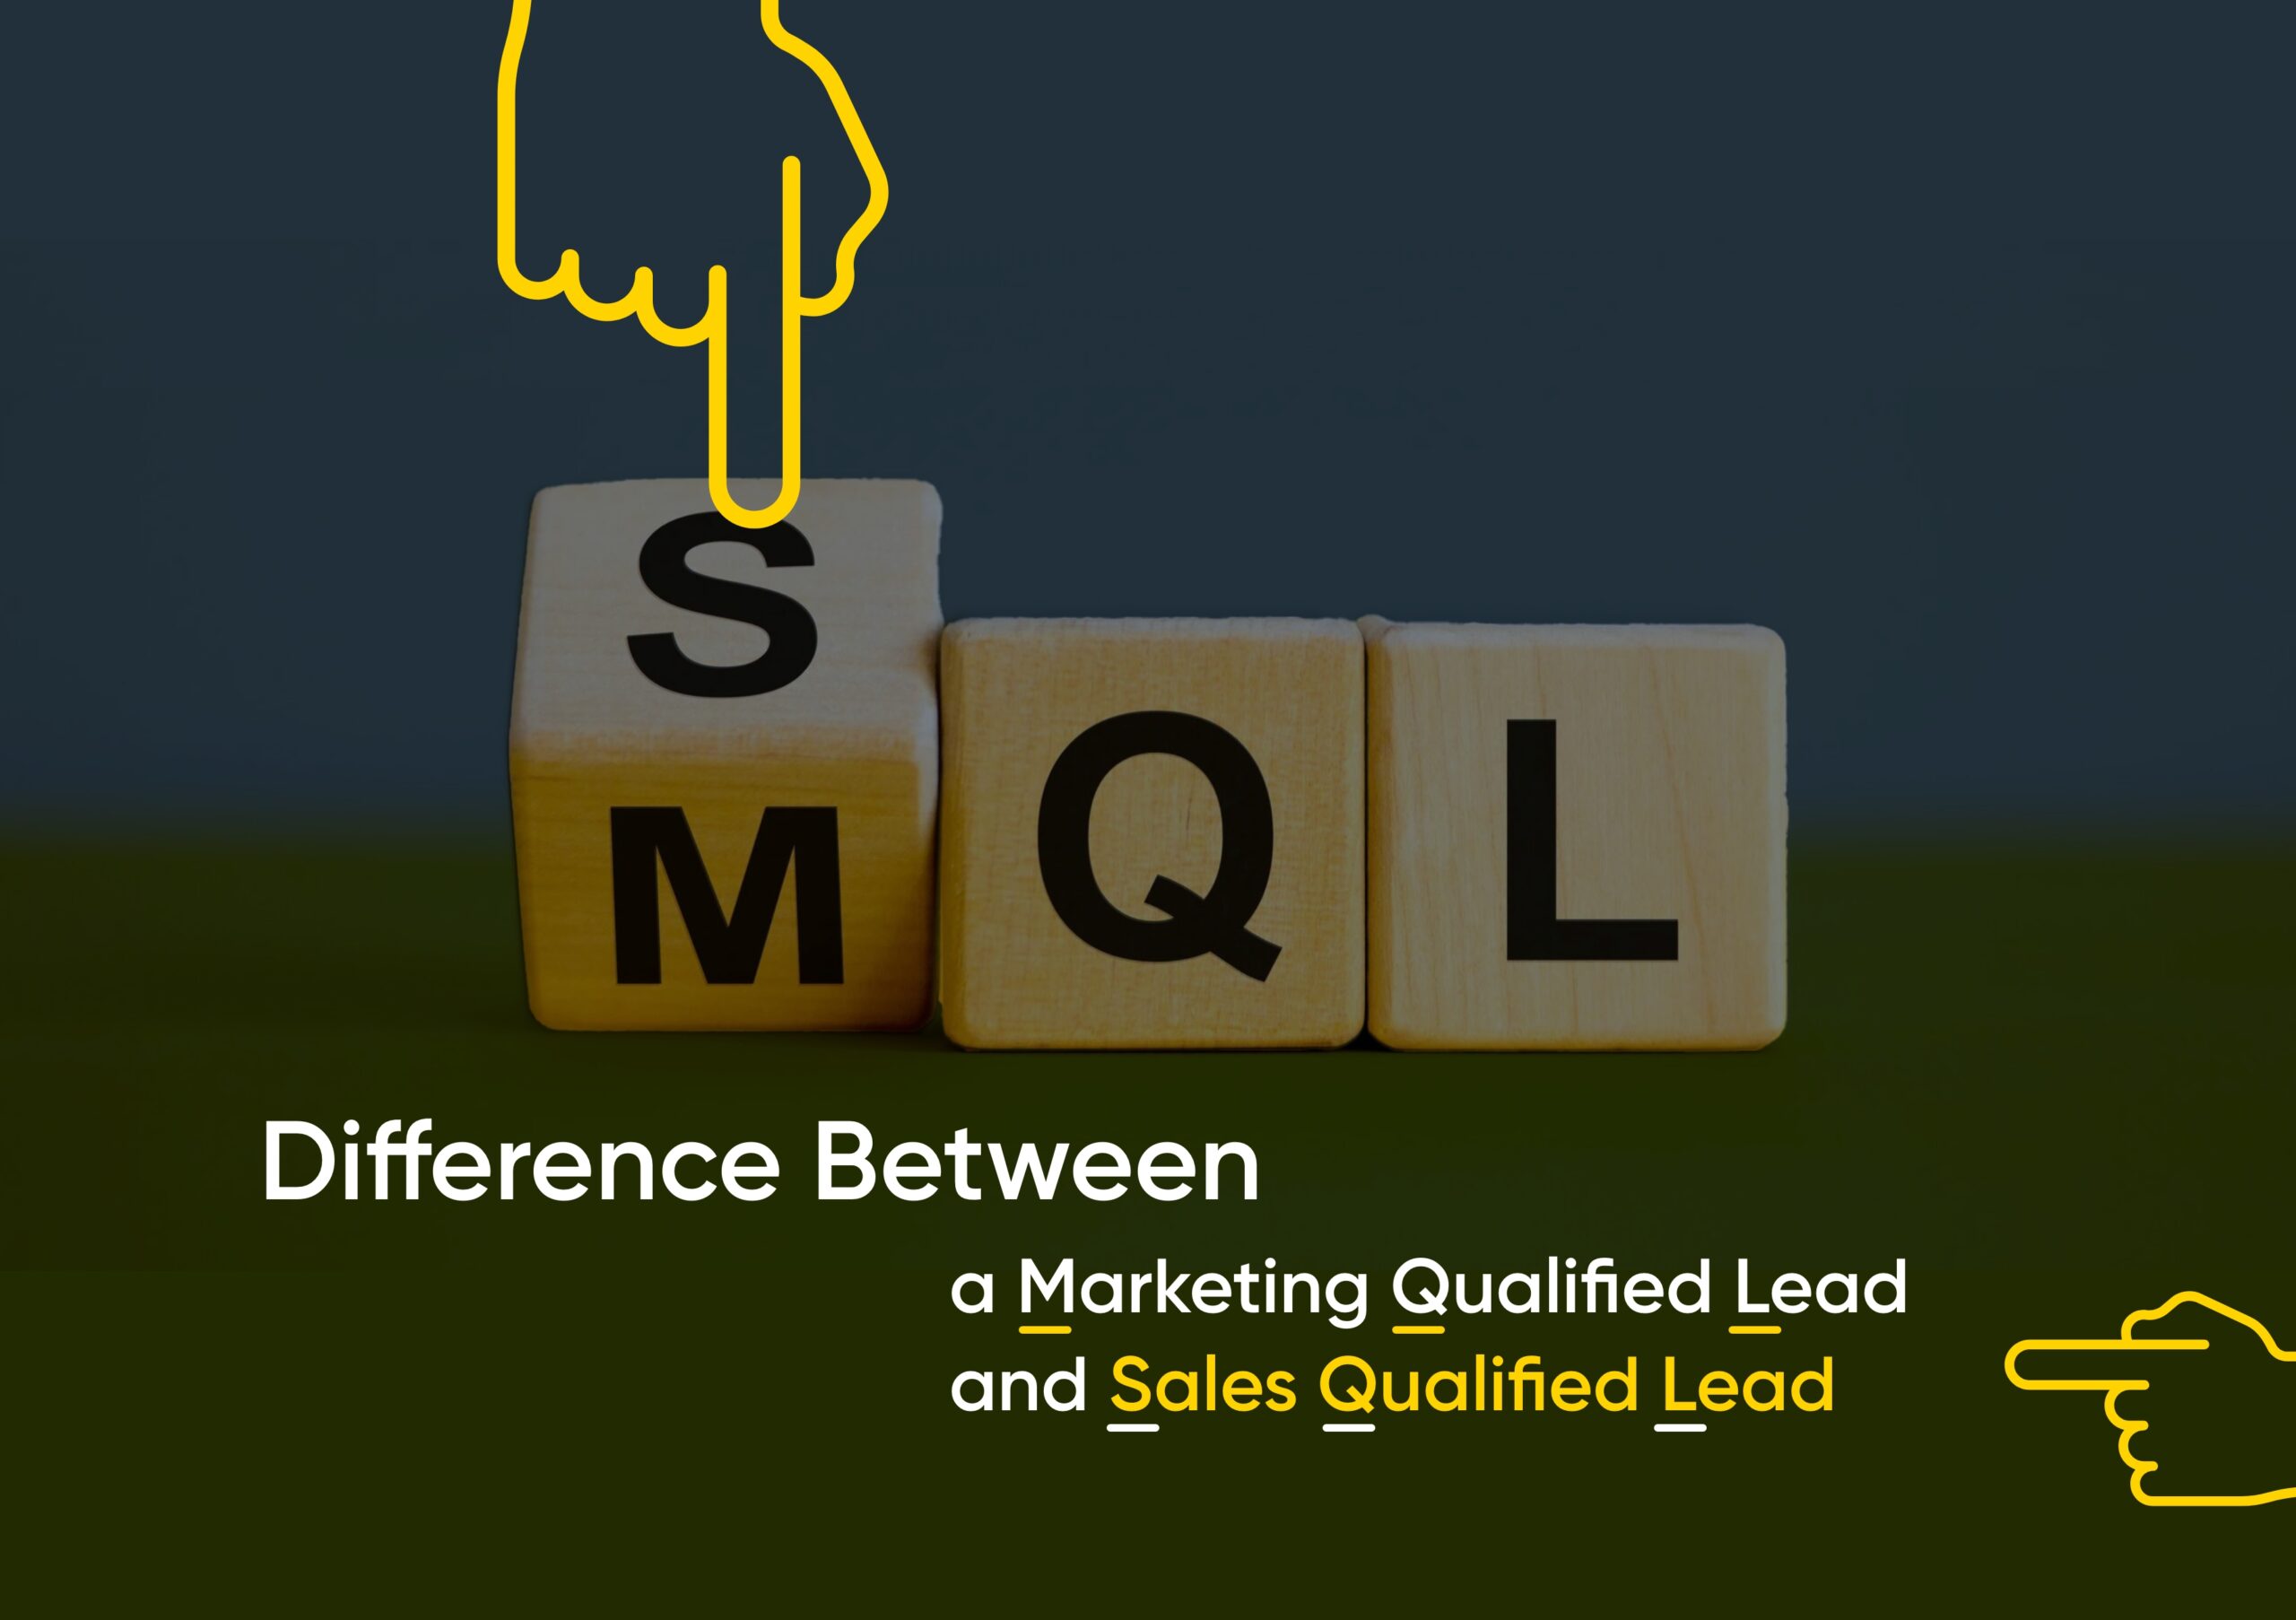 Difference Between a Marketing Qualified Lead and Sales Qualified Lead